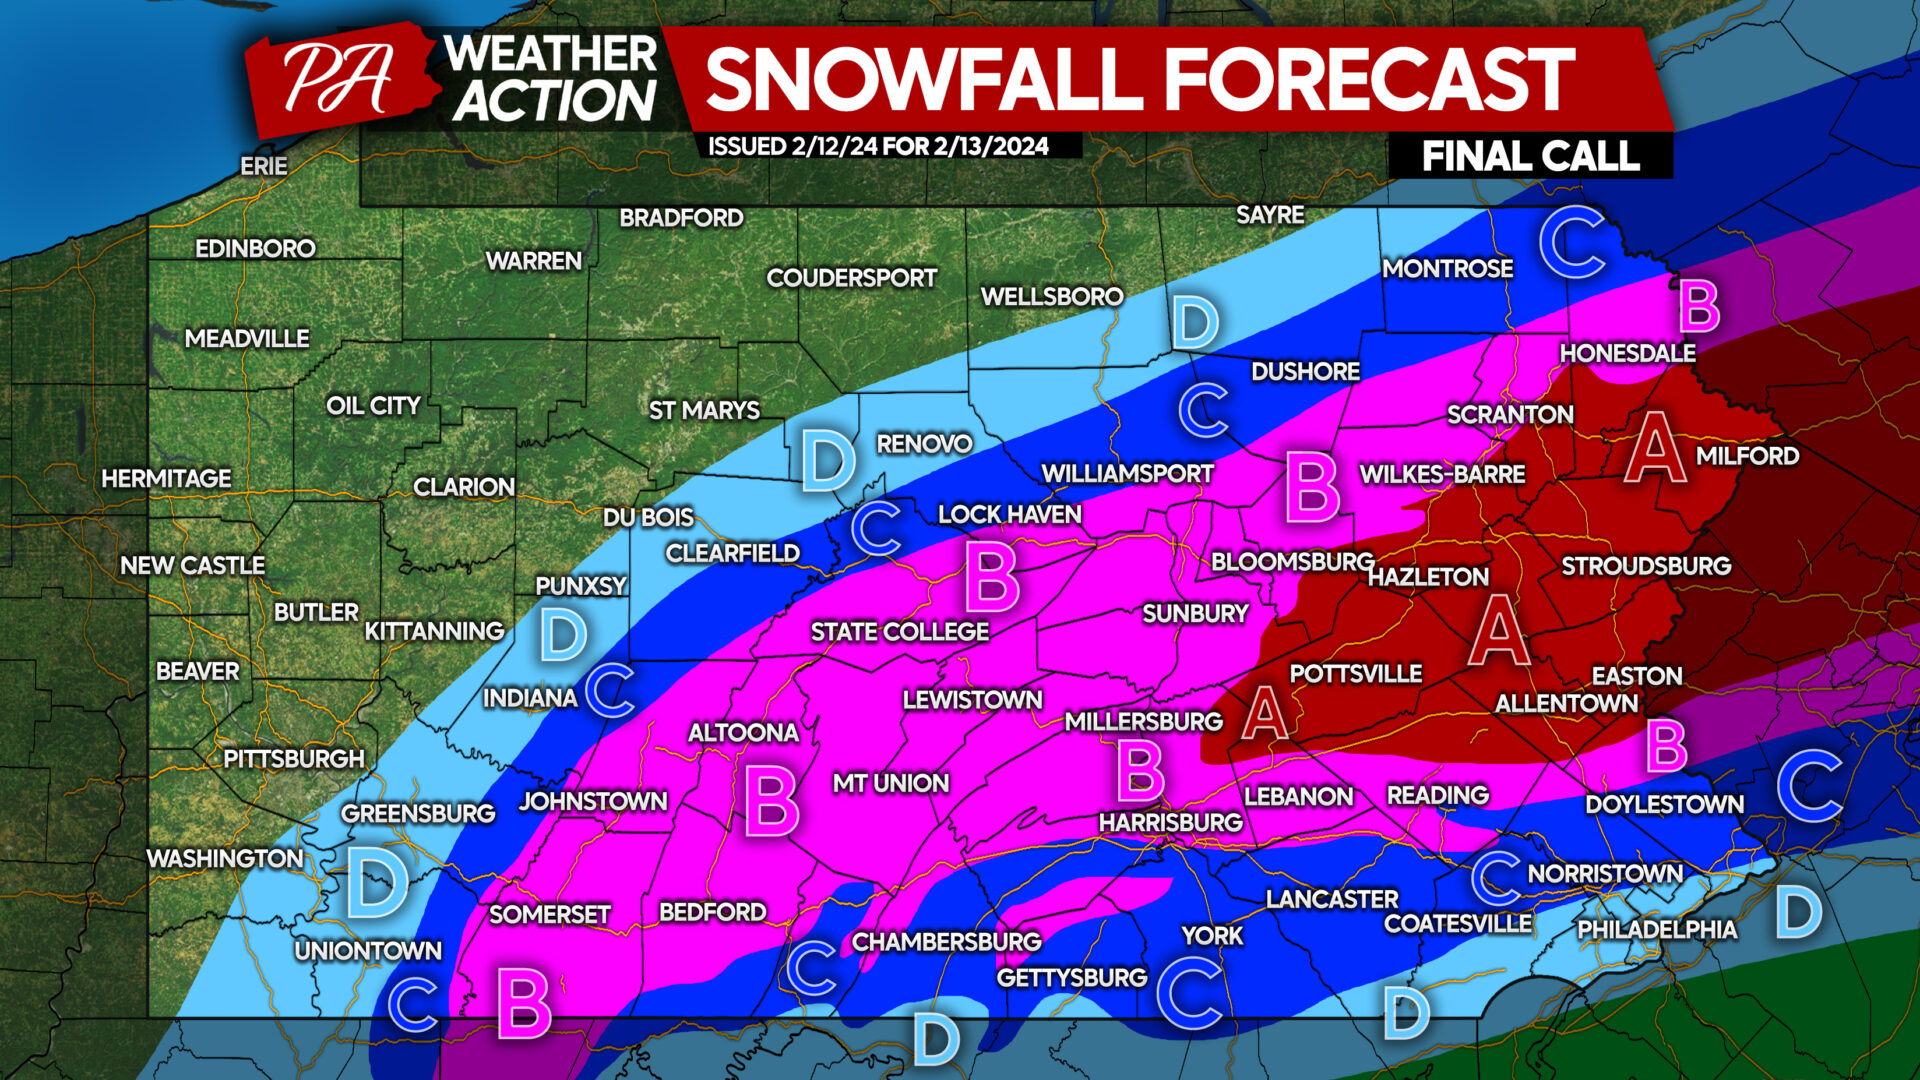 Final Call Snowfall Forecast for Tuesday’s Significant Snowstorm in Pennsylvania; Major Changes to Forecast